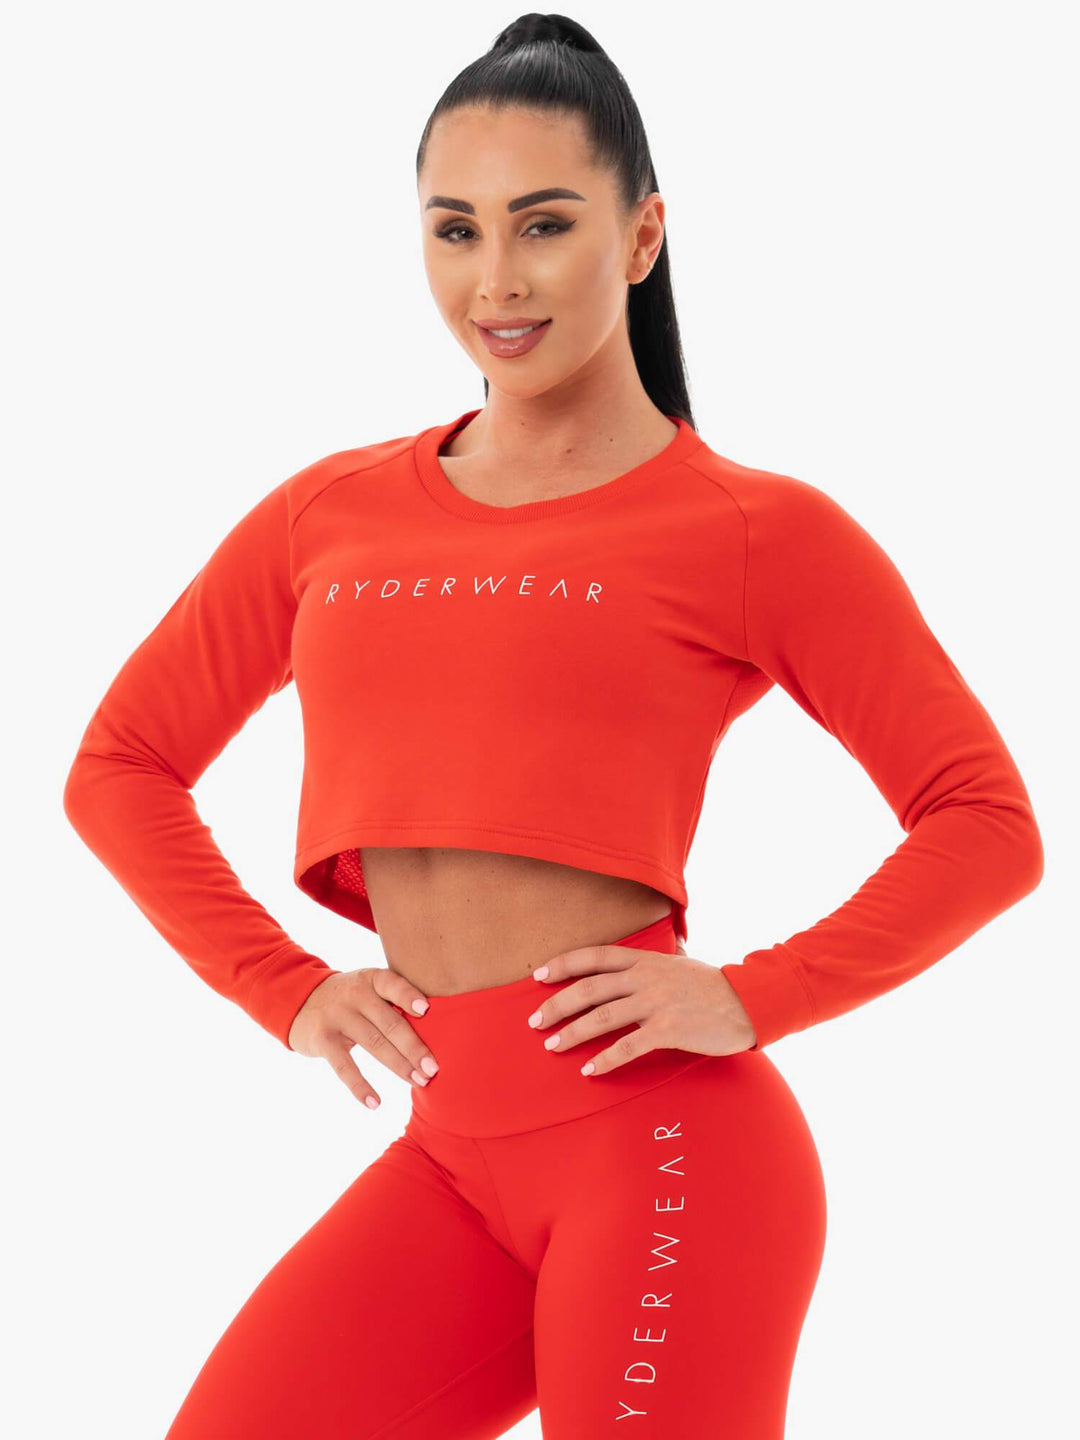 Staples Cropped Sweater - Red Clothing Ryderwear 